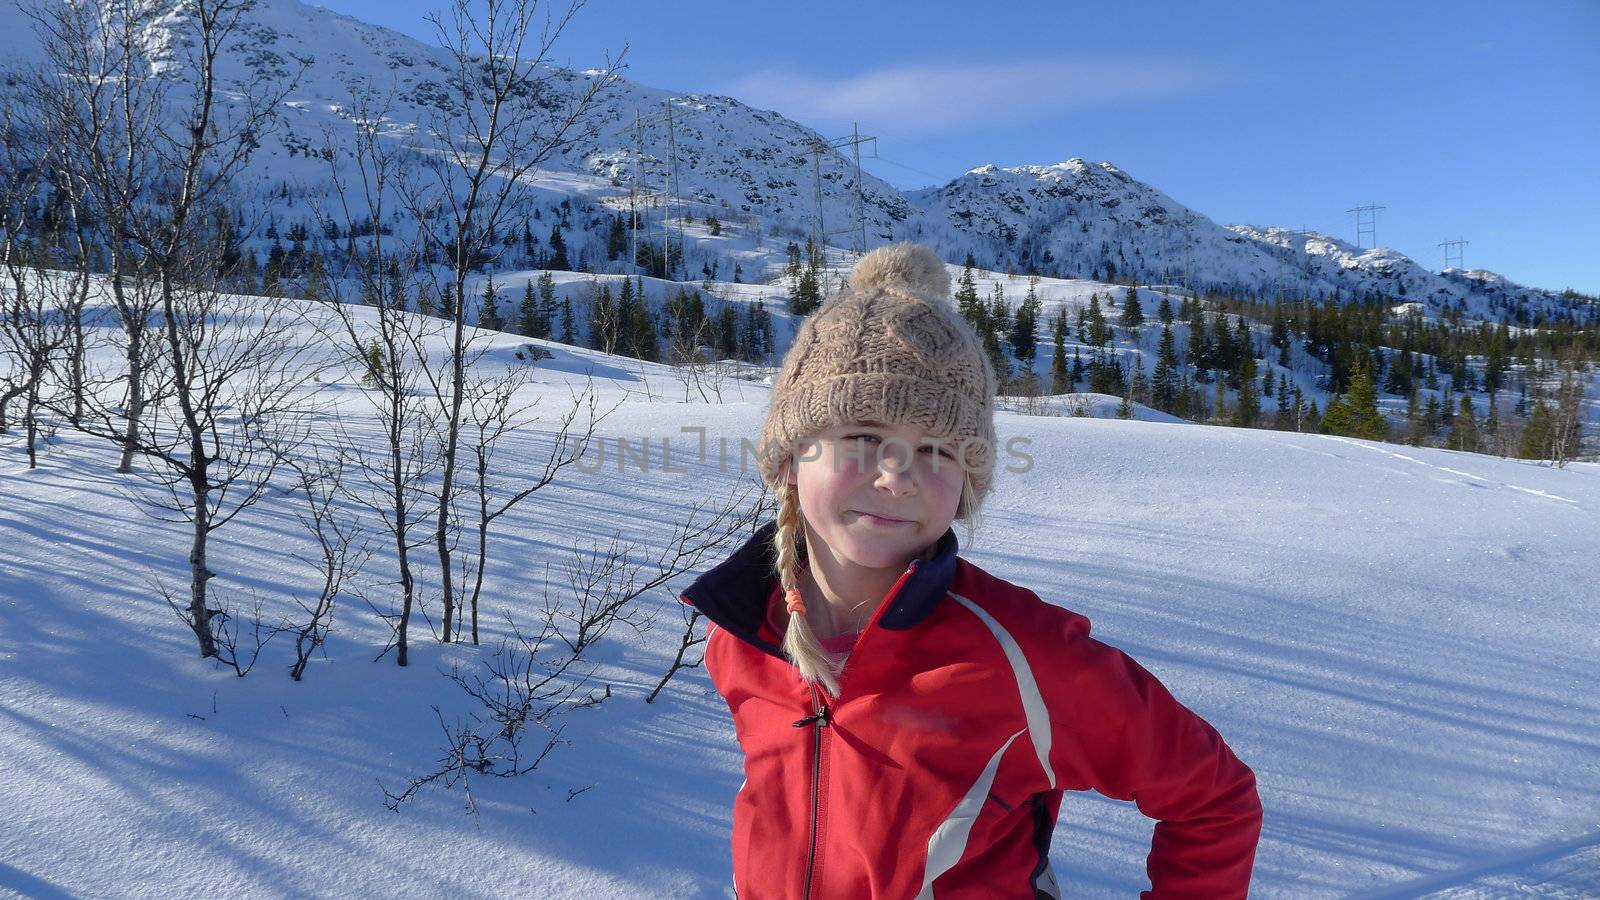 Girl skiing i Norwegian mountains. Please note: No negative use allowed